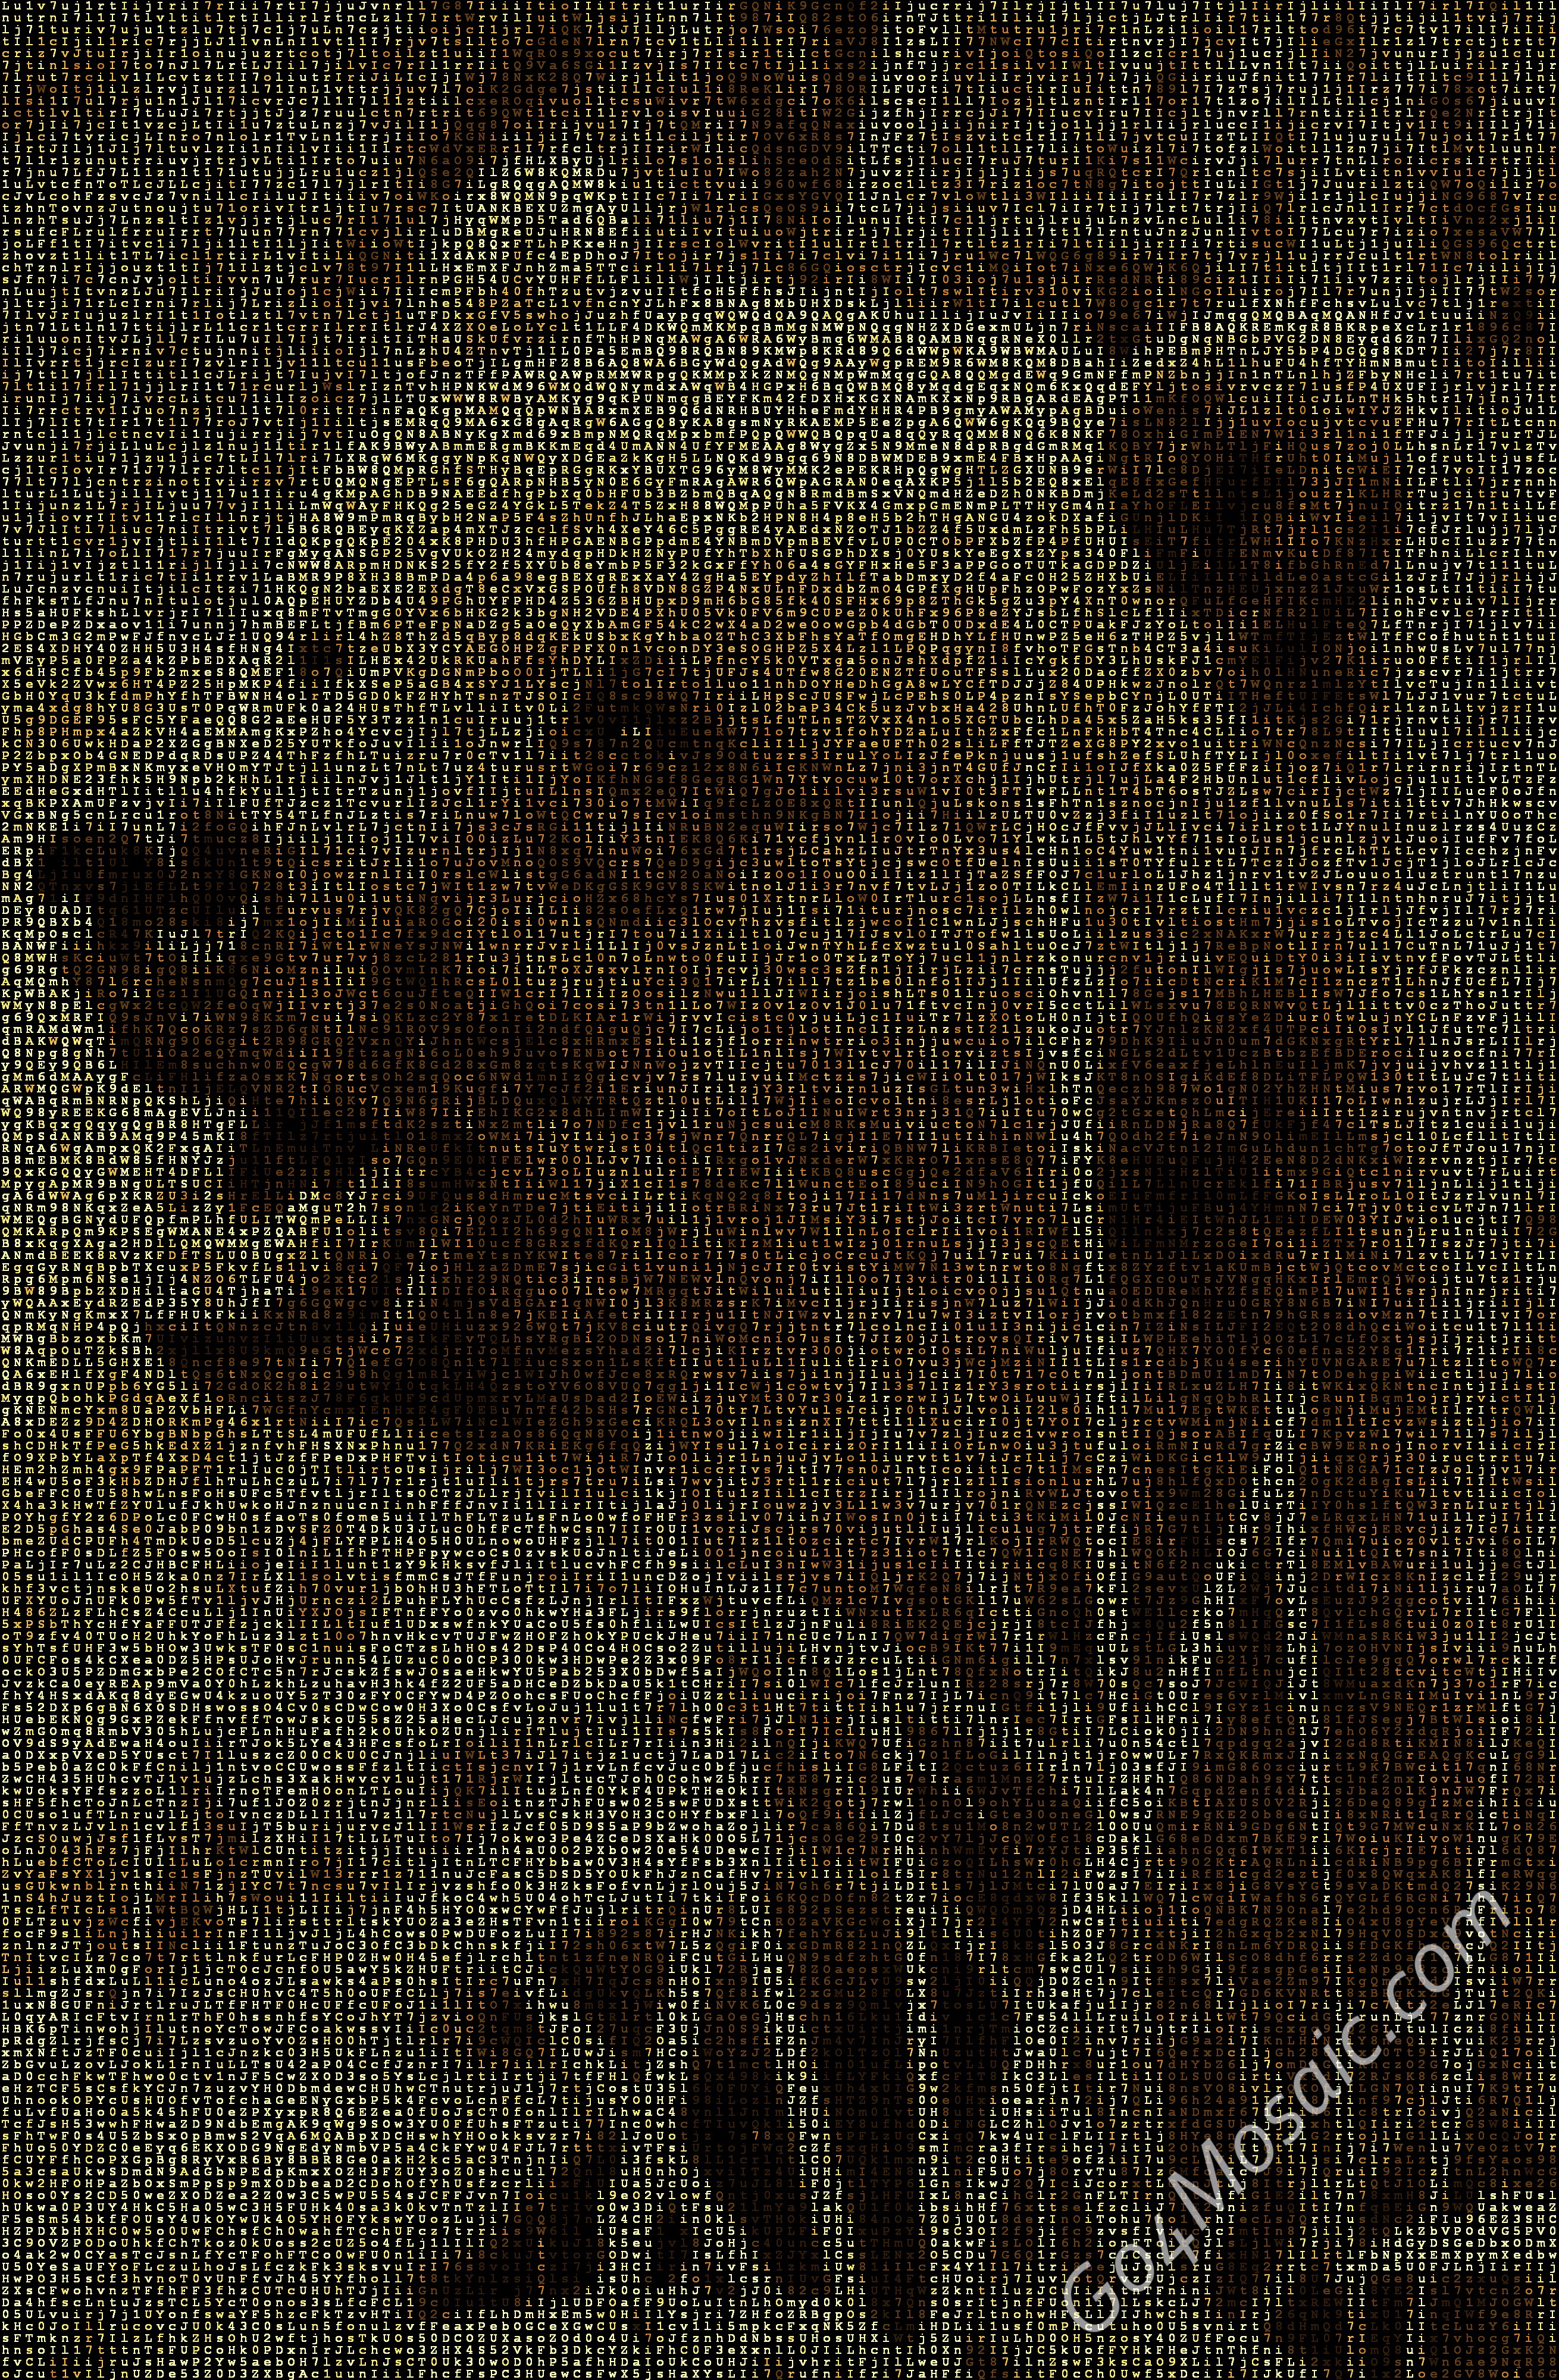 Bear mosaic from matrix letters